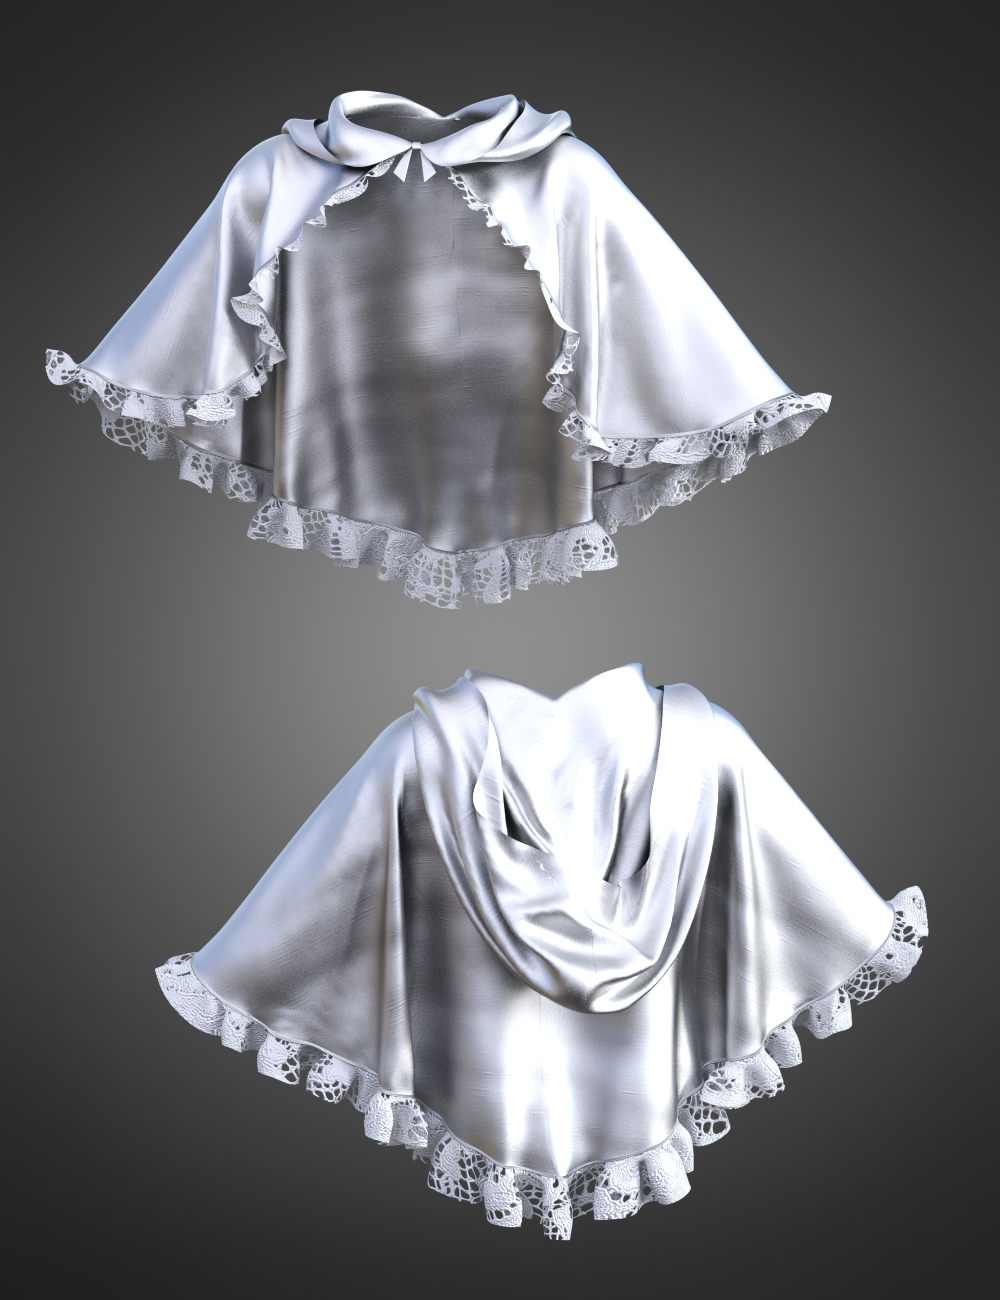 CB Luna Spell Outfit dForce Cape for Genesis 8 and 8.1 Females by: CynderBlue, 3D Models by Daz 3D